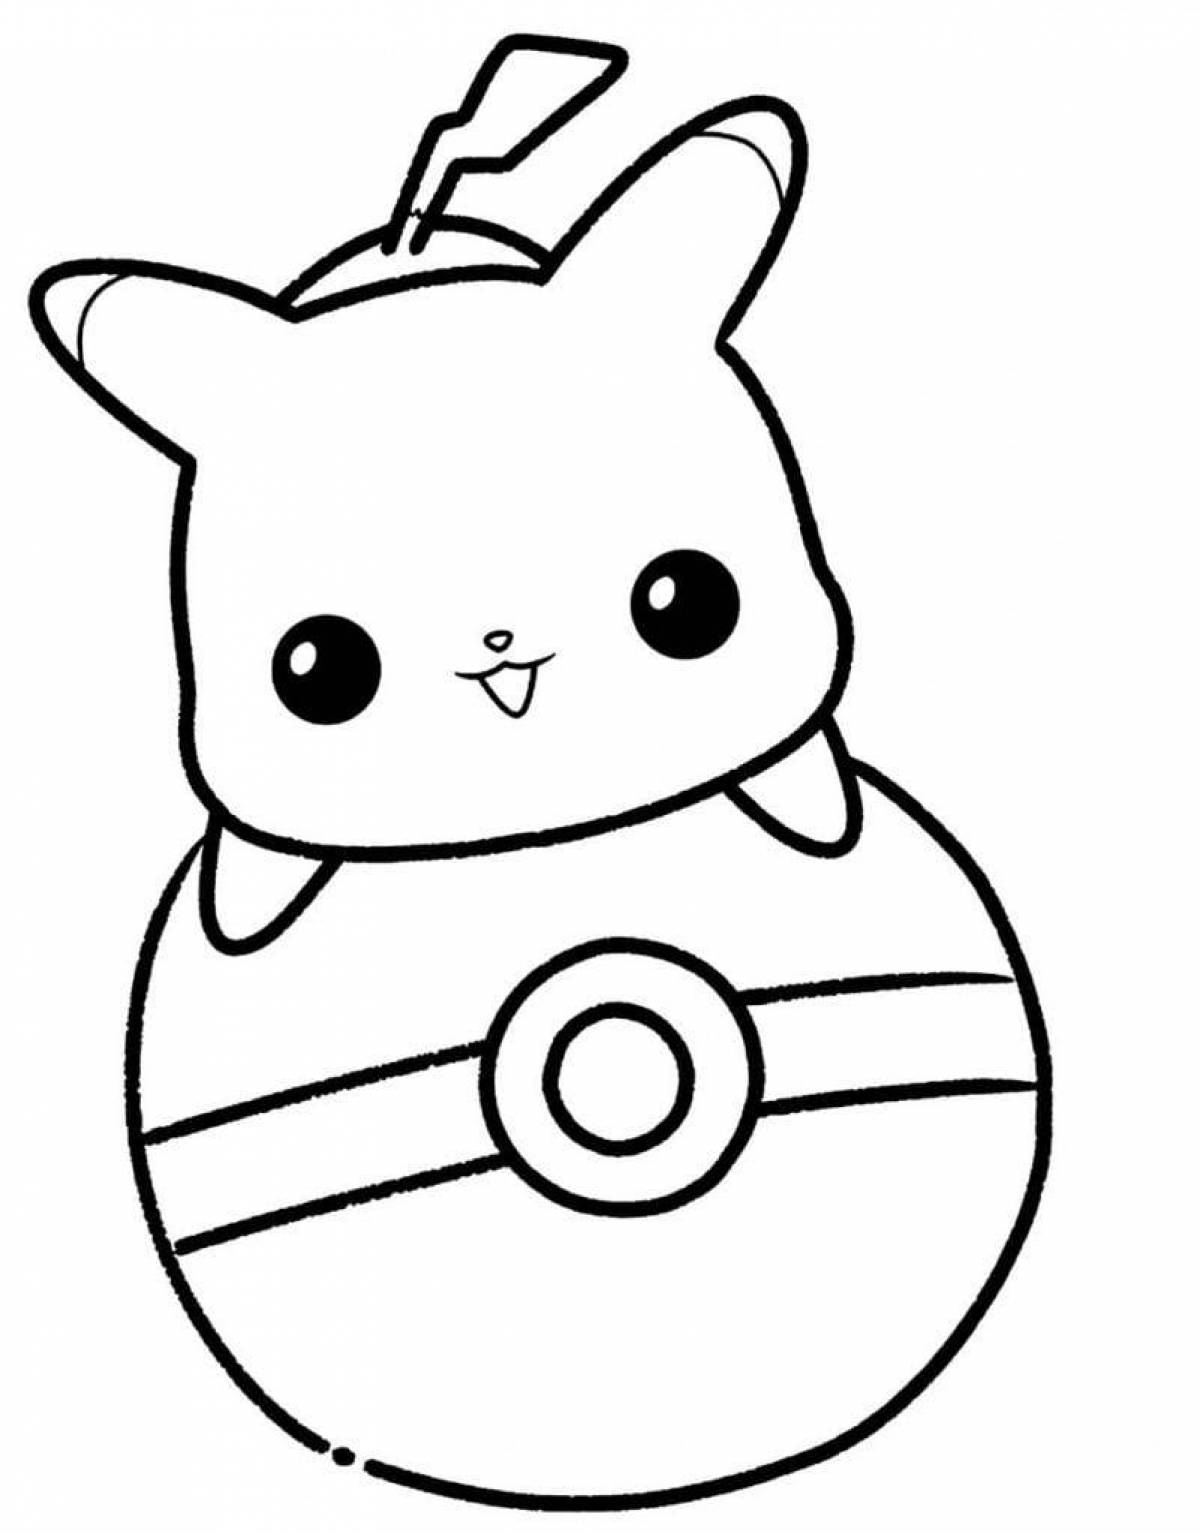 Amazing Pikachu coloring pages for kids